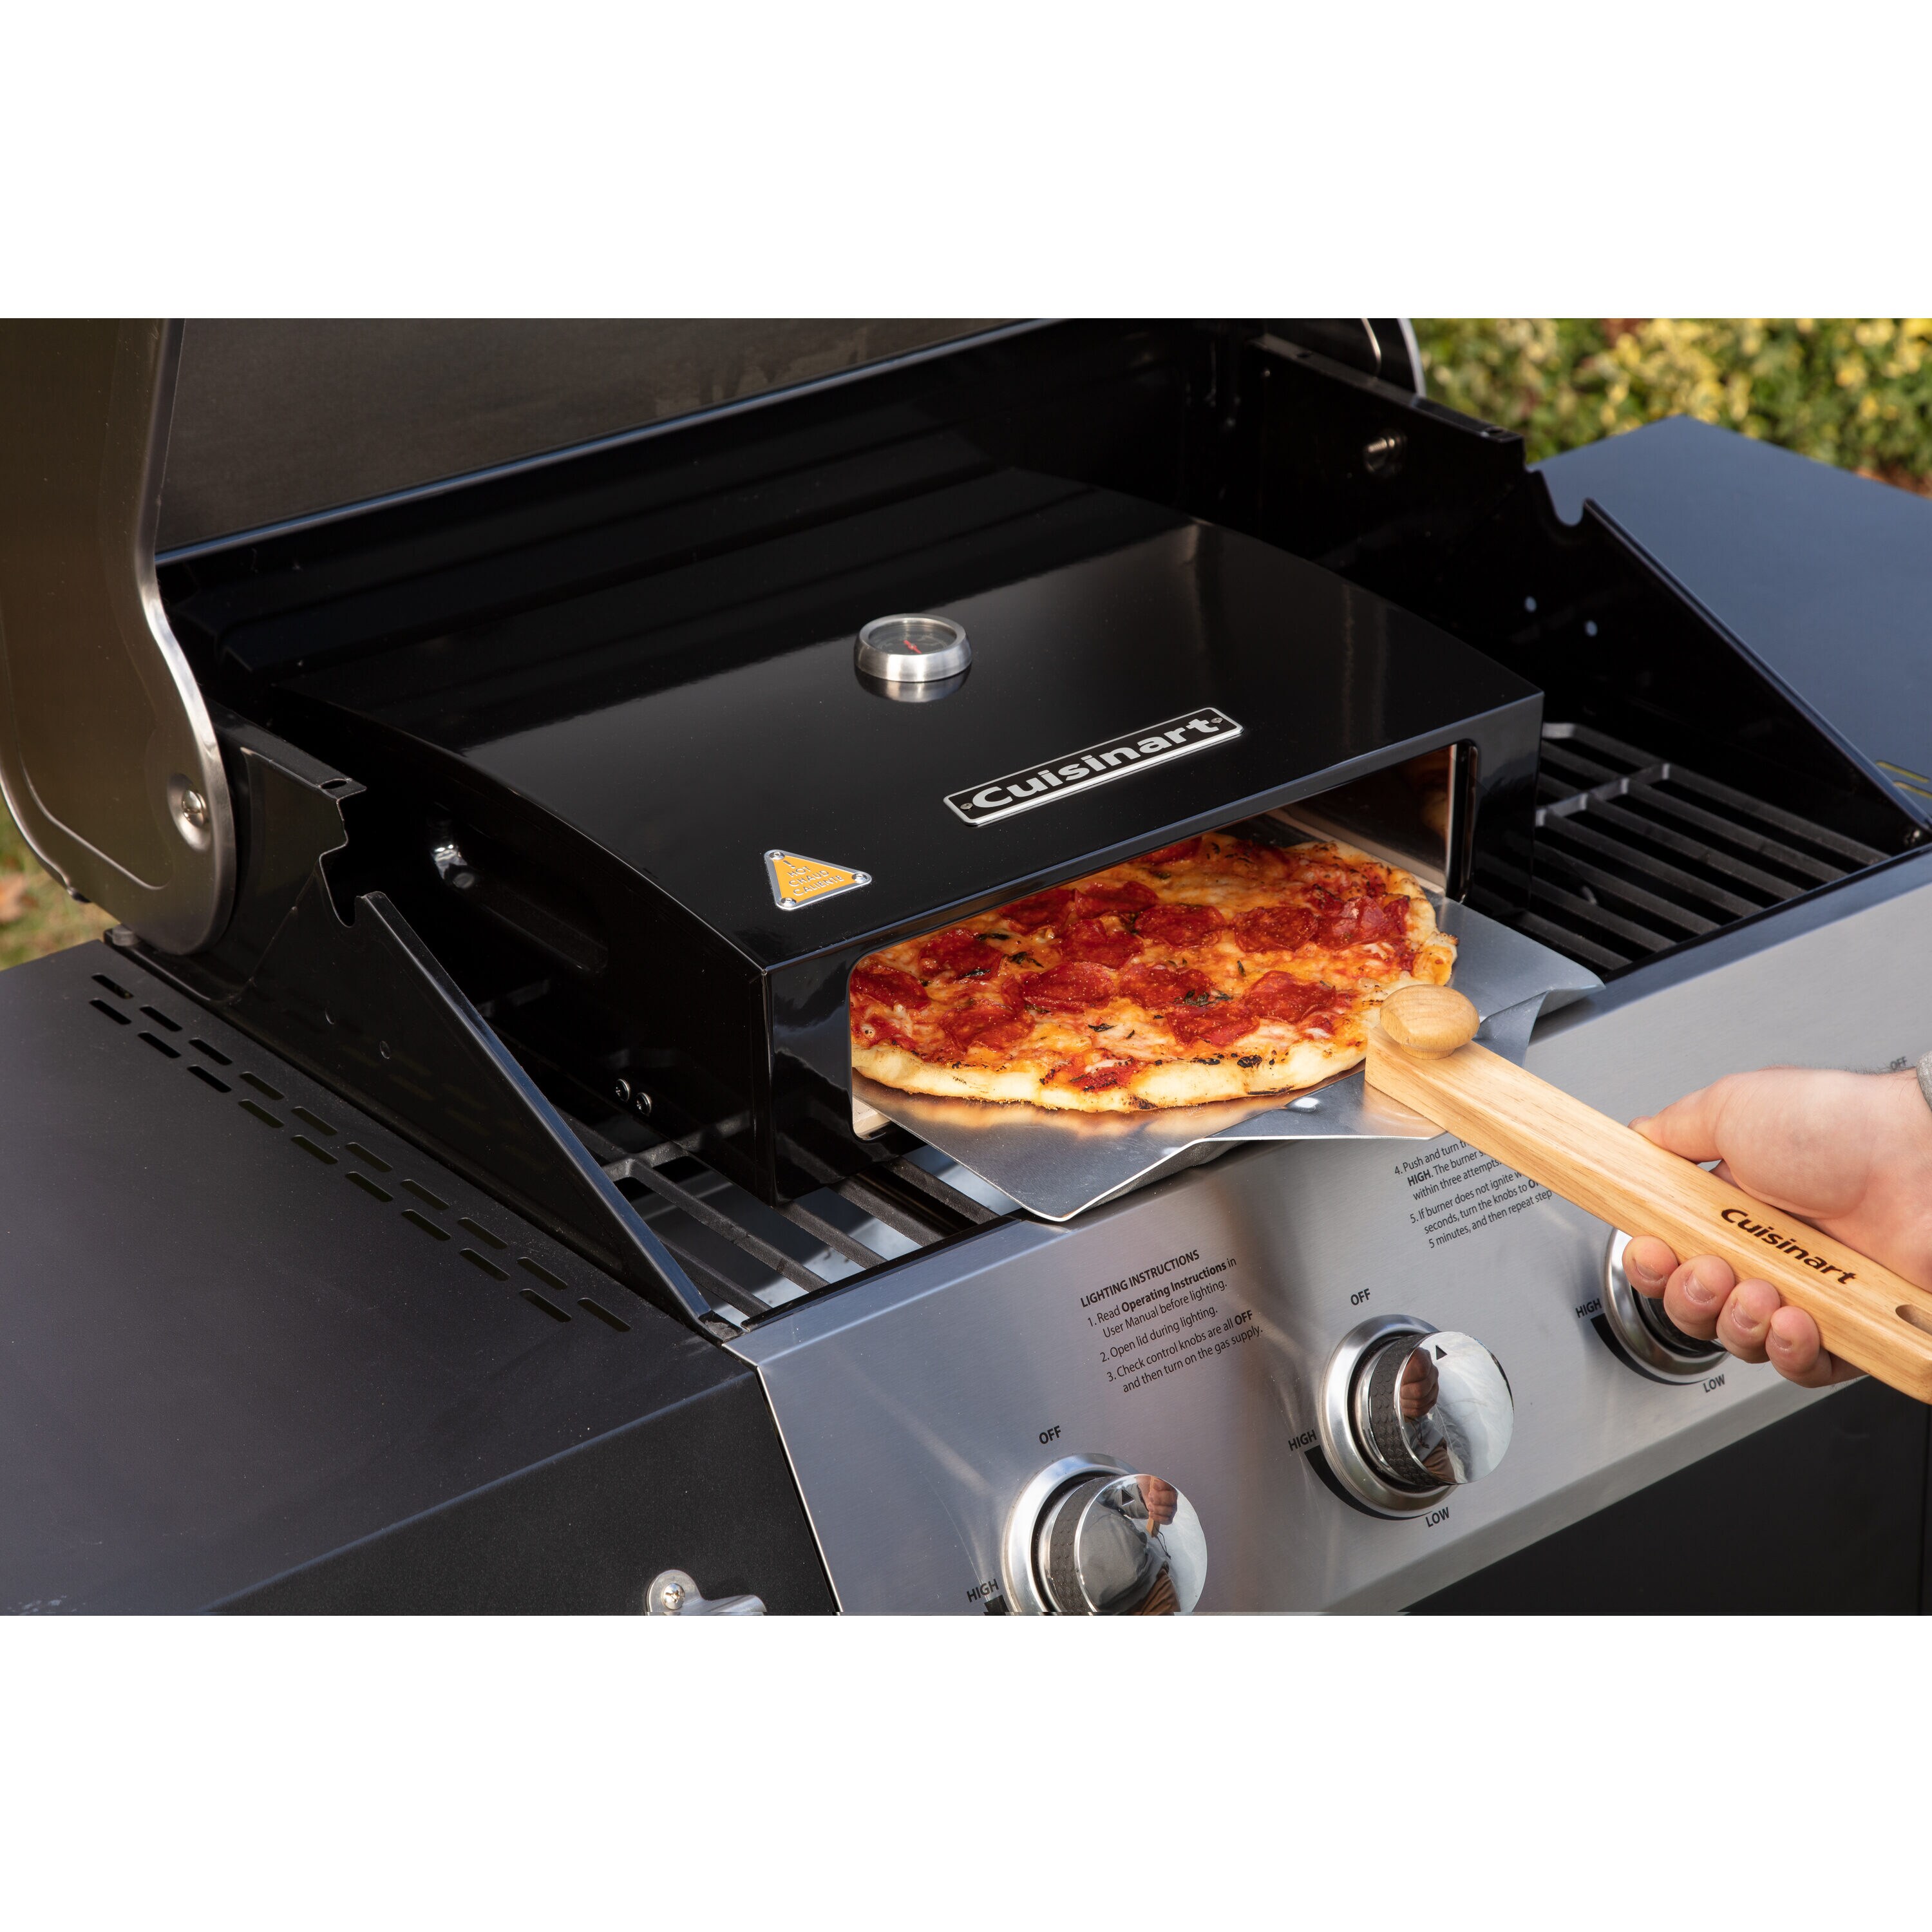 12.5-Inch Pizza Pan/Flat Griddle with T-Lock Detachable Handle, 1